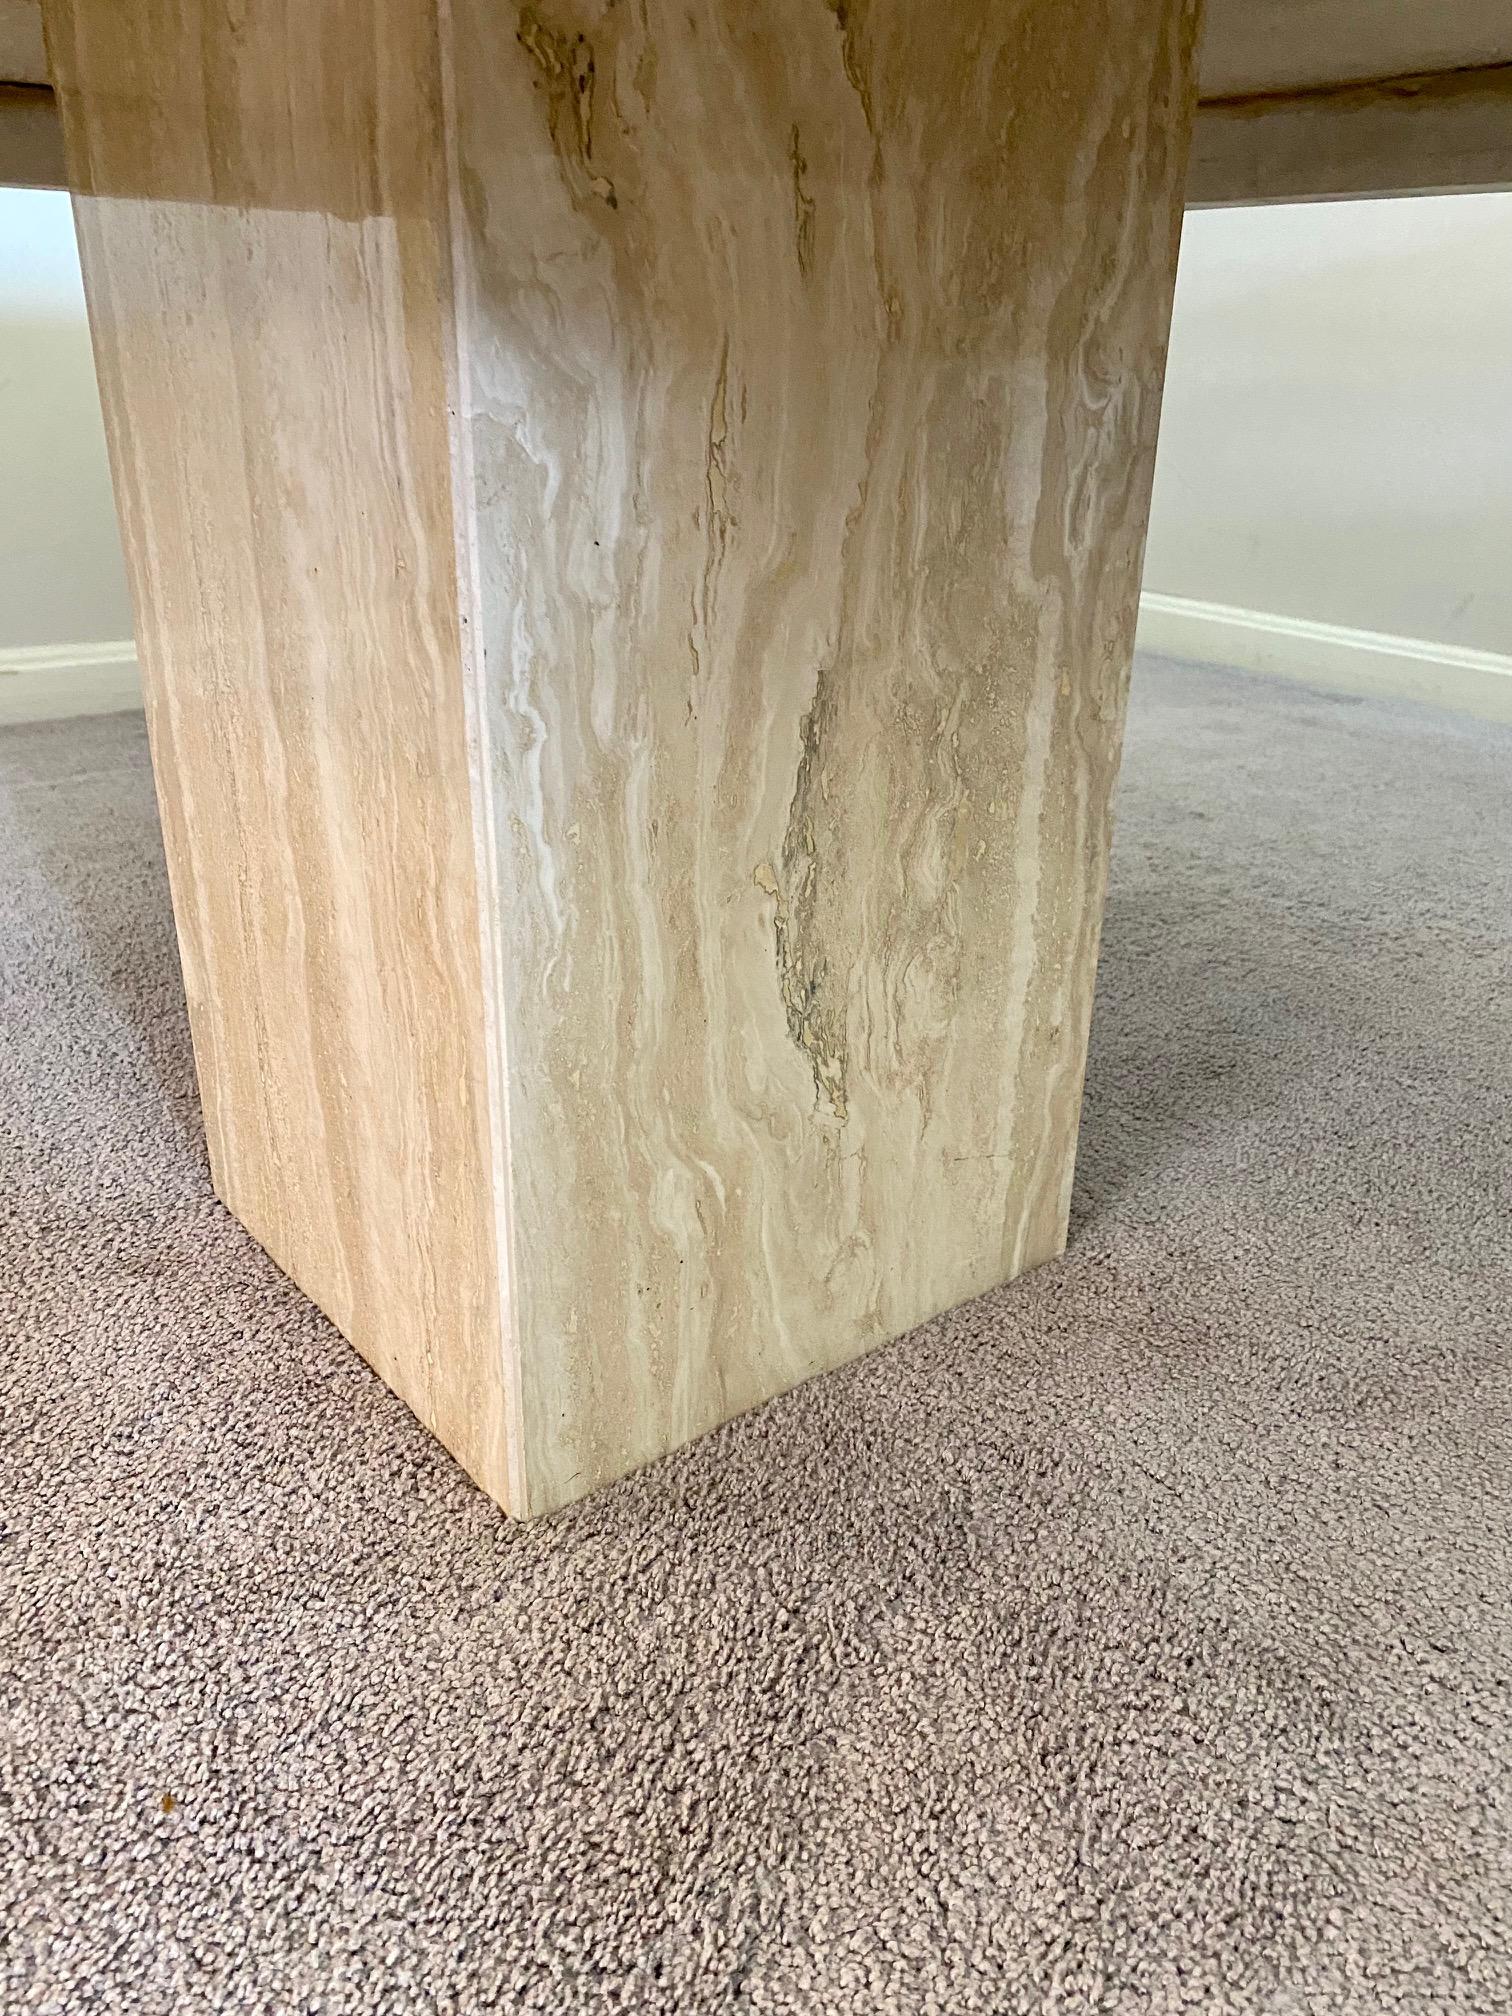 A lovely minimalist Italian modern travertine marble cocktail table circa 1970s-80s. This stunning square table top with beveled edge features shades of white and cream veining with beveled edges supporting a center square pedestal base. This piece